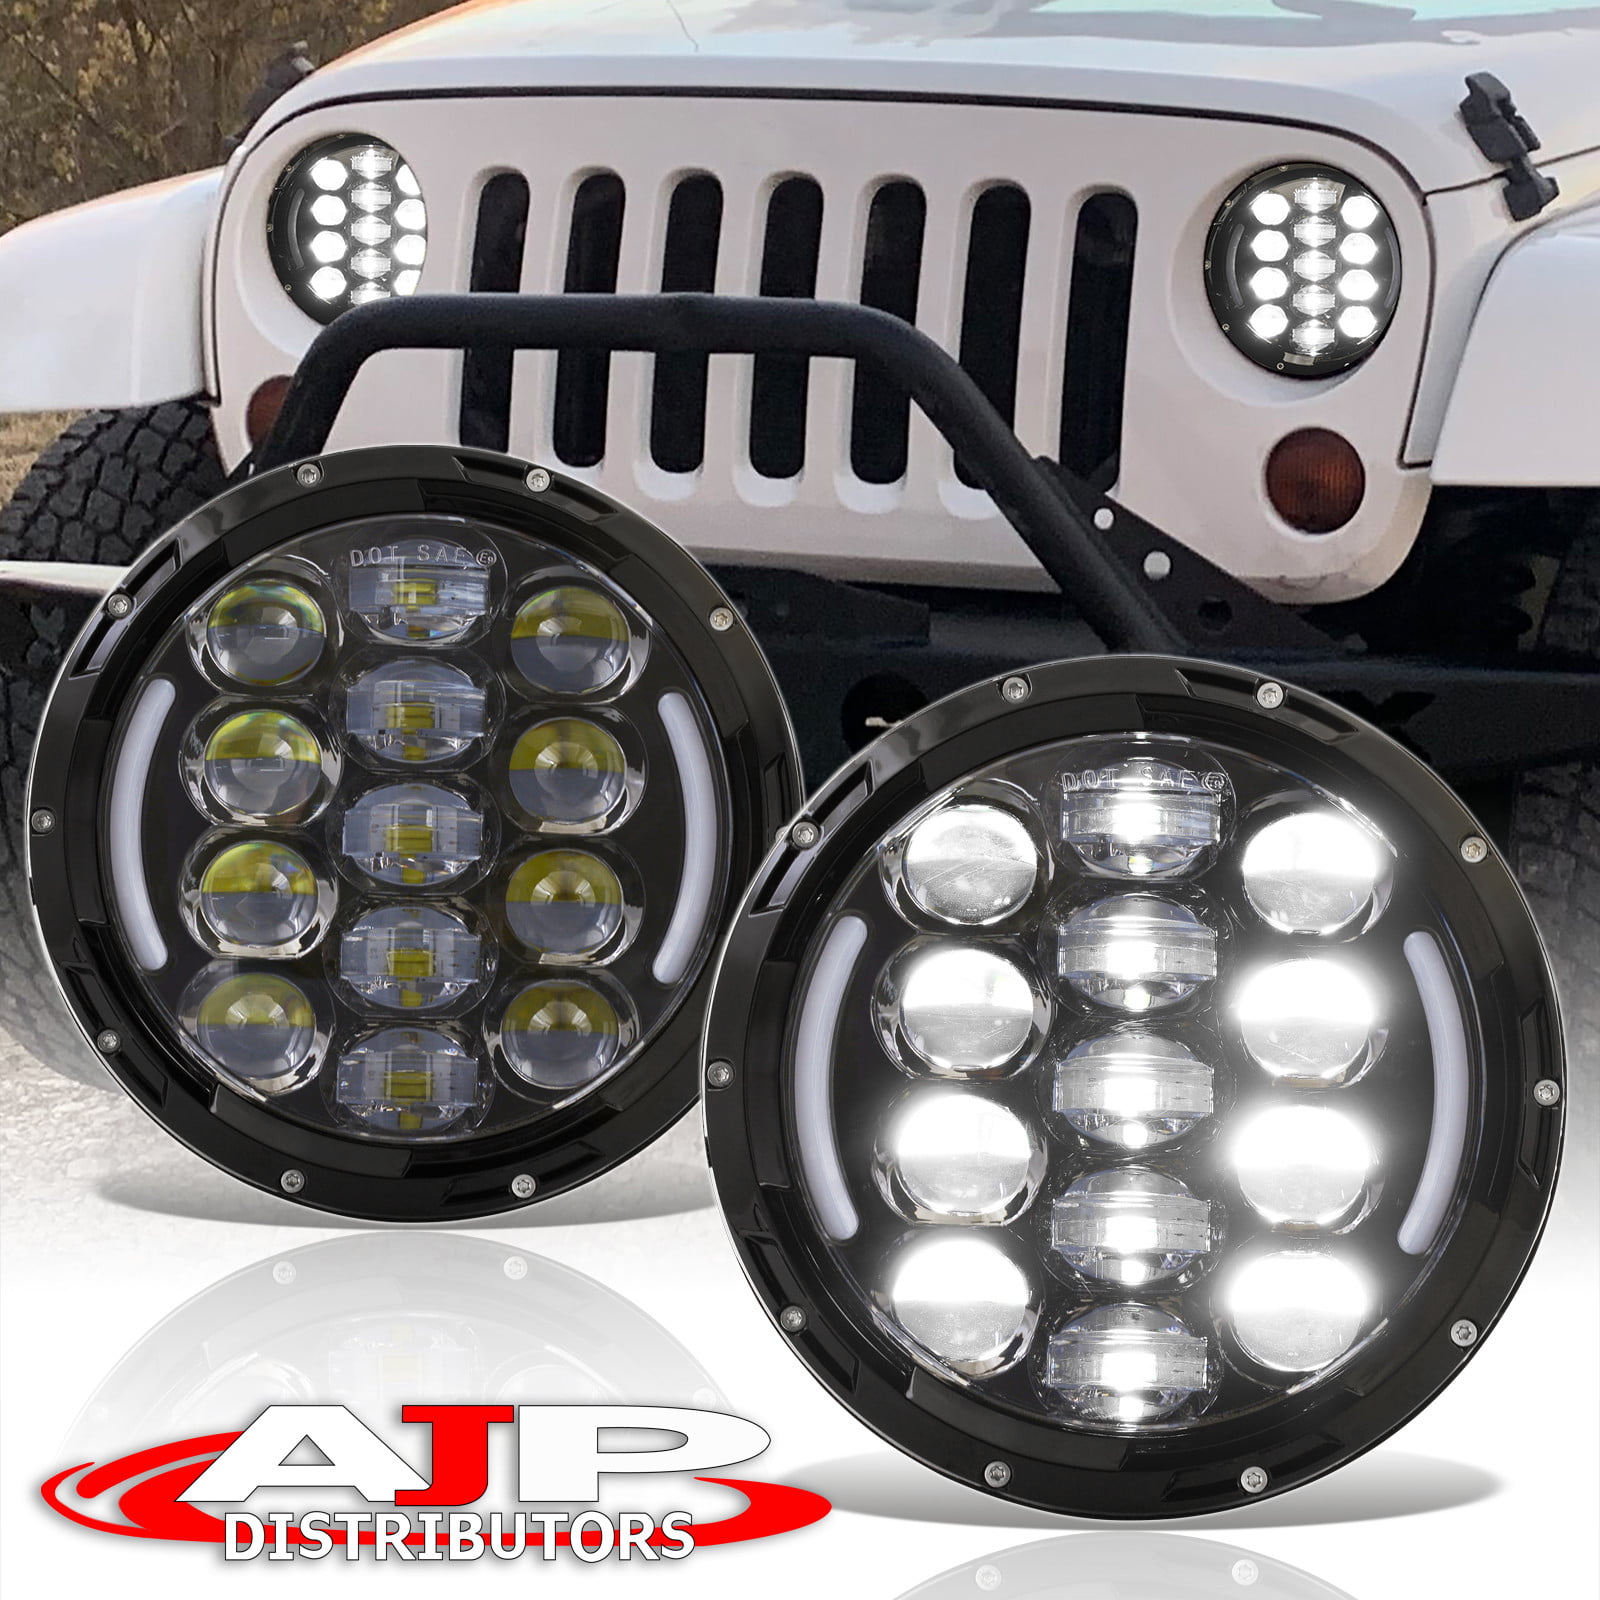 2X 7 INCH LED Headlights Fit Jeep Wrangler Land Rover Defender H6012 H6014 H6015 